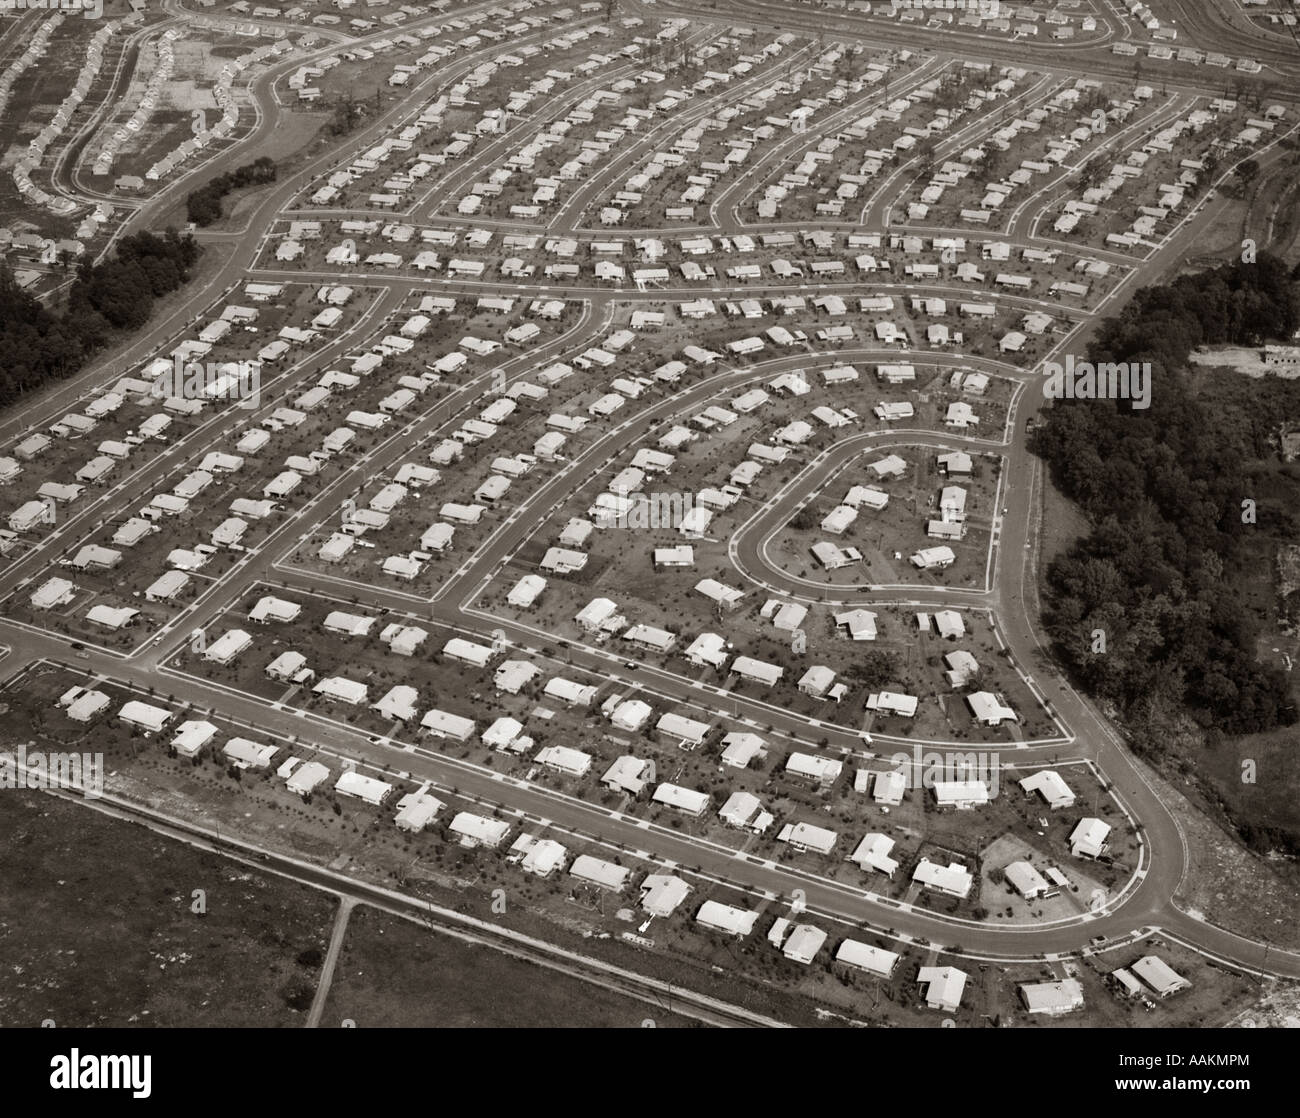 1950s 1960s LEVITTOWN PENNSYLVANIA - AERIAL VIEW OF A HOUSING DEVELOPMENT TRACT Stock Photo